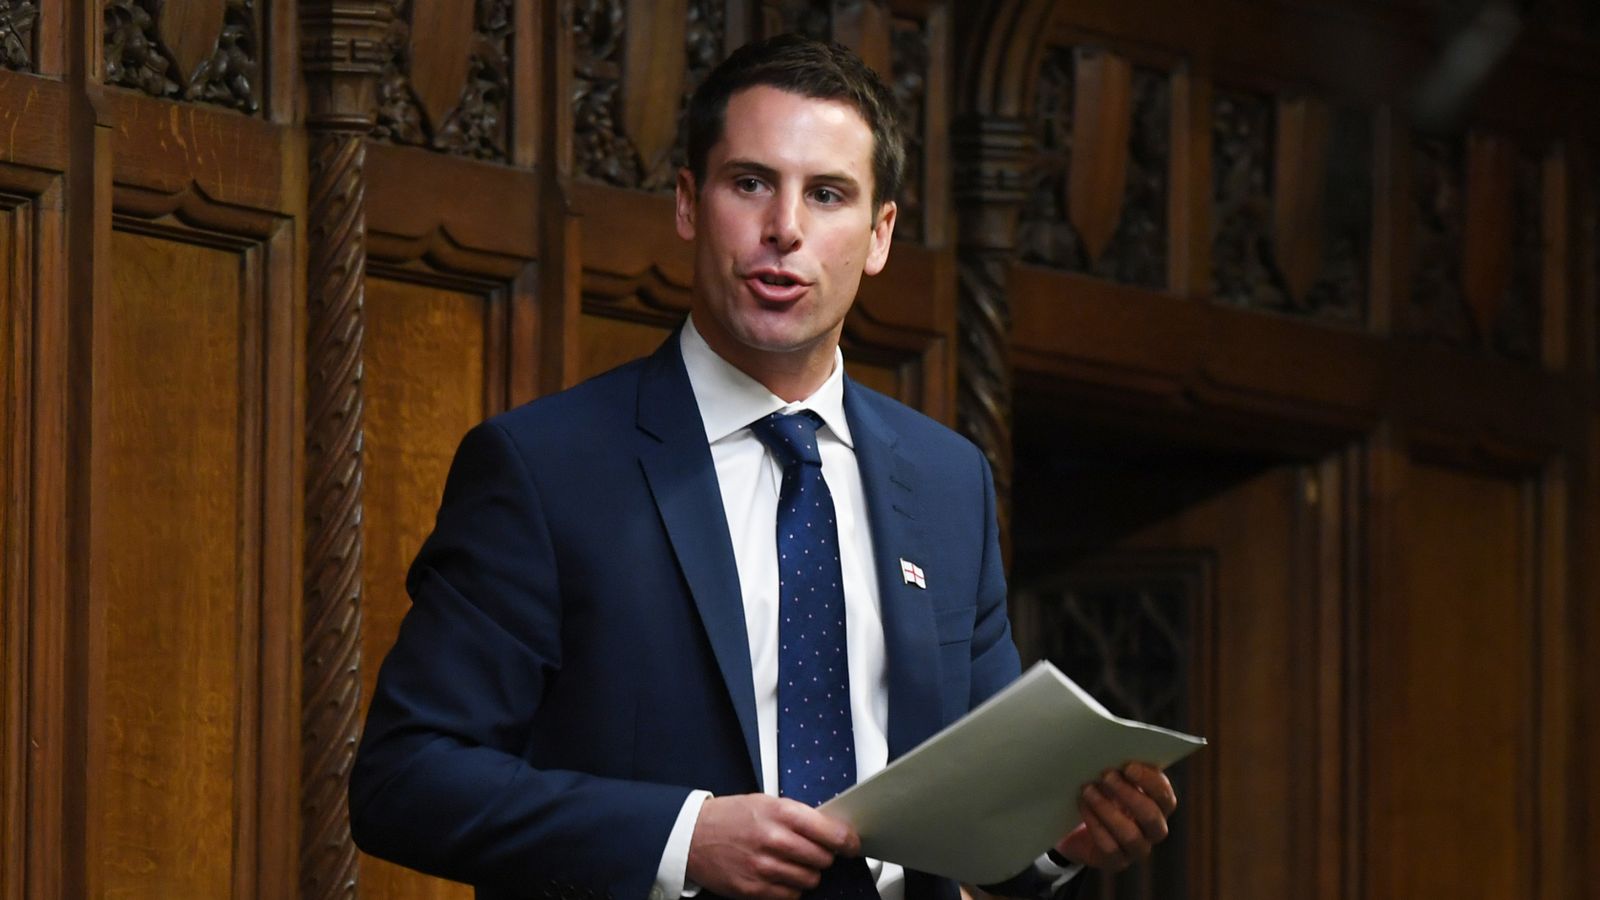 MP suggests he is willing to break lobbying rules for money